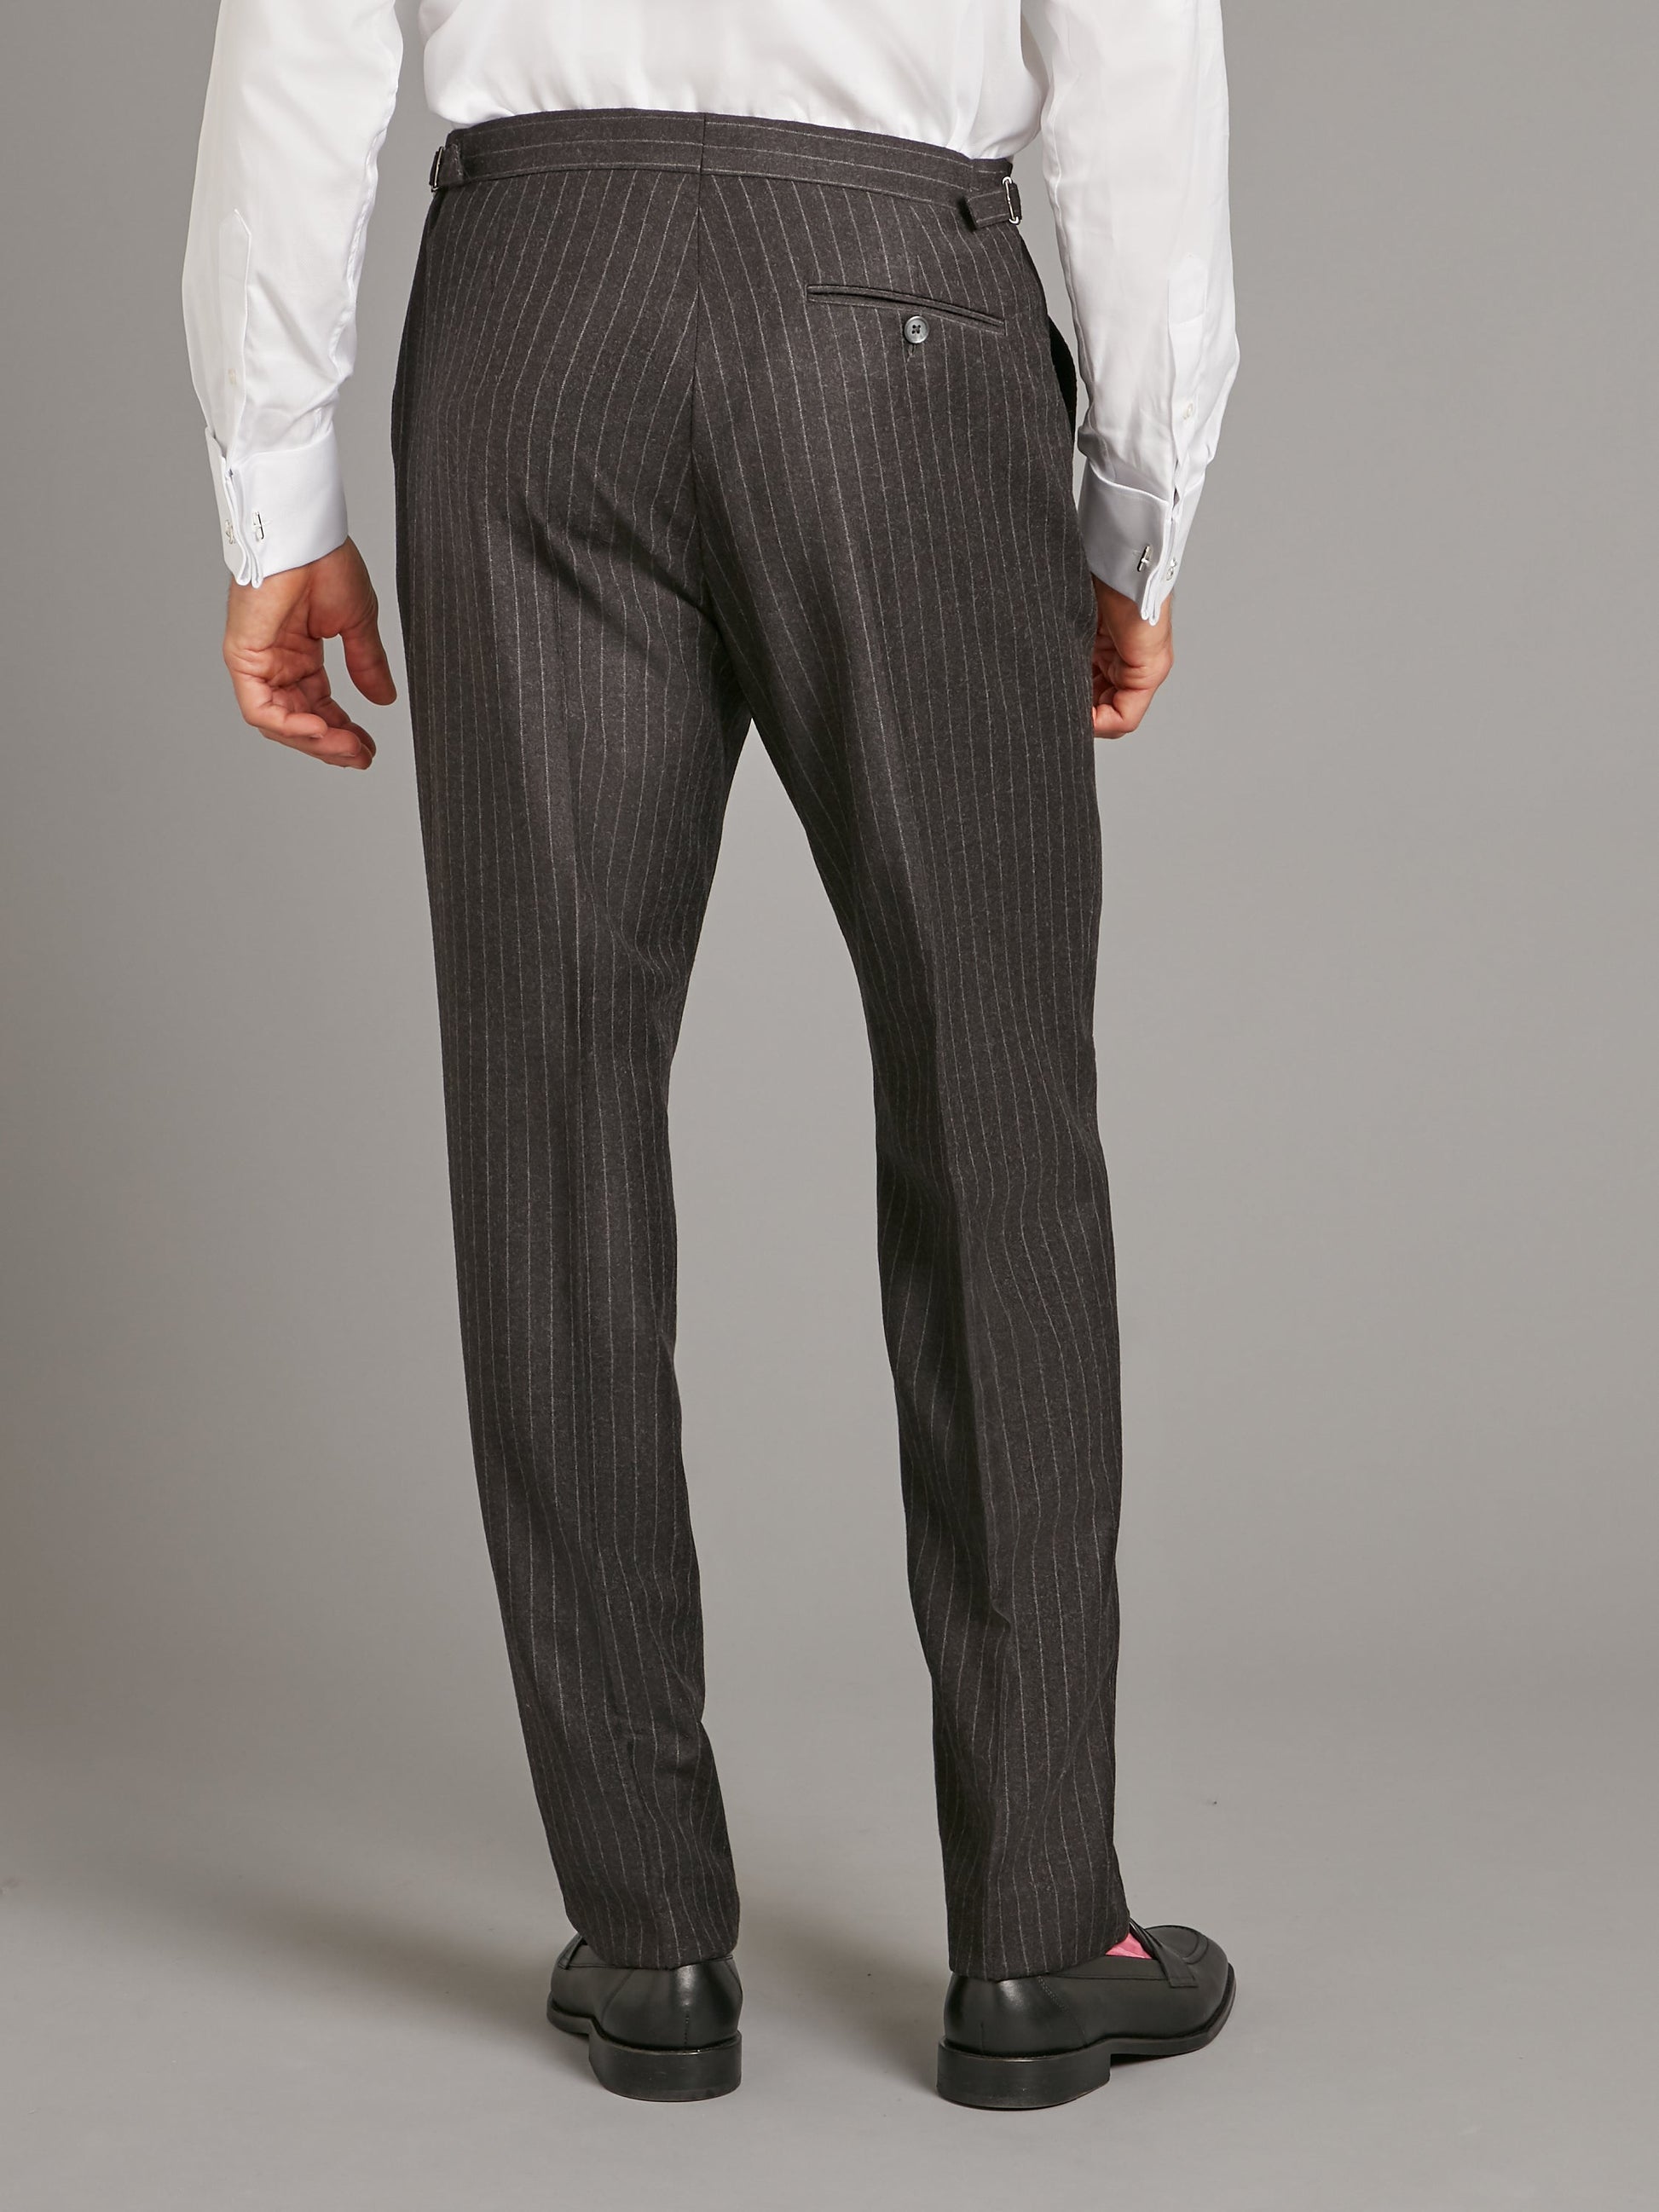 carlyle suit chalk stripe flannel charcoal 7